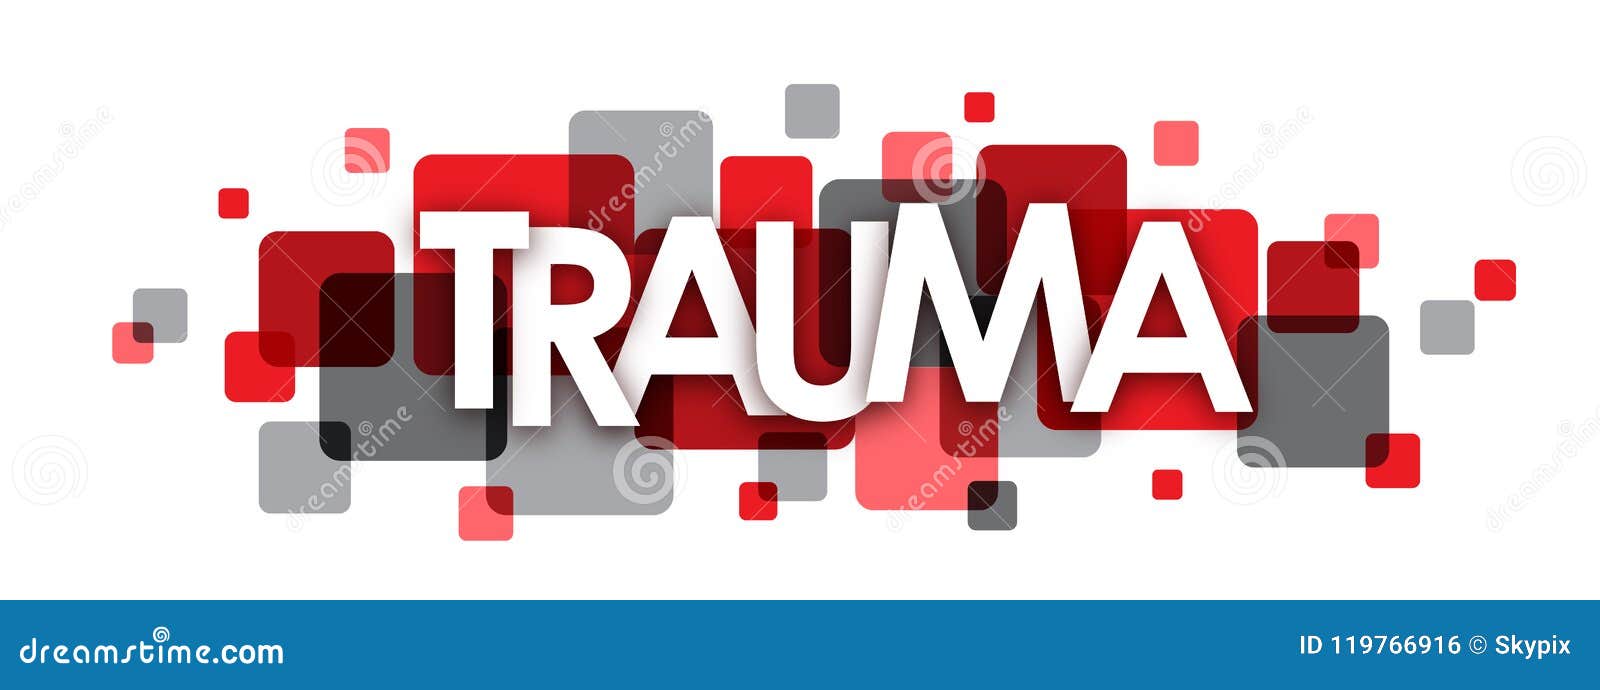 trauma red and grey overlapping squares banner